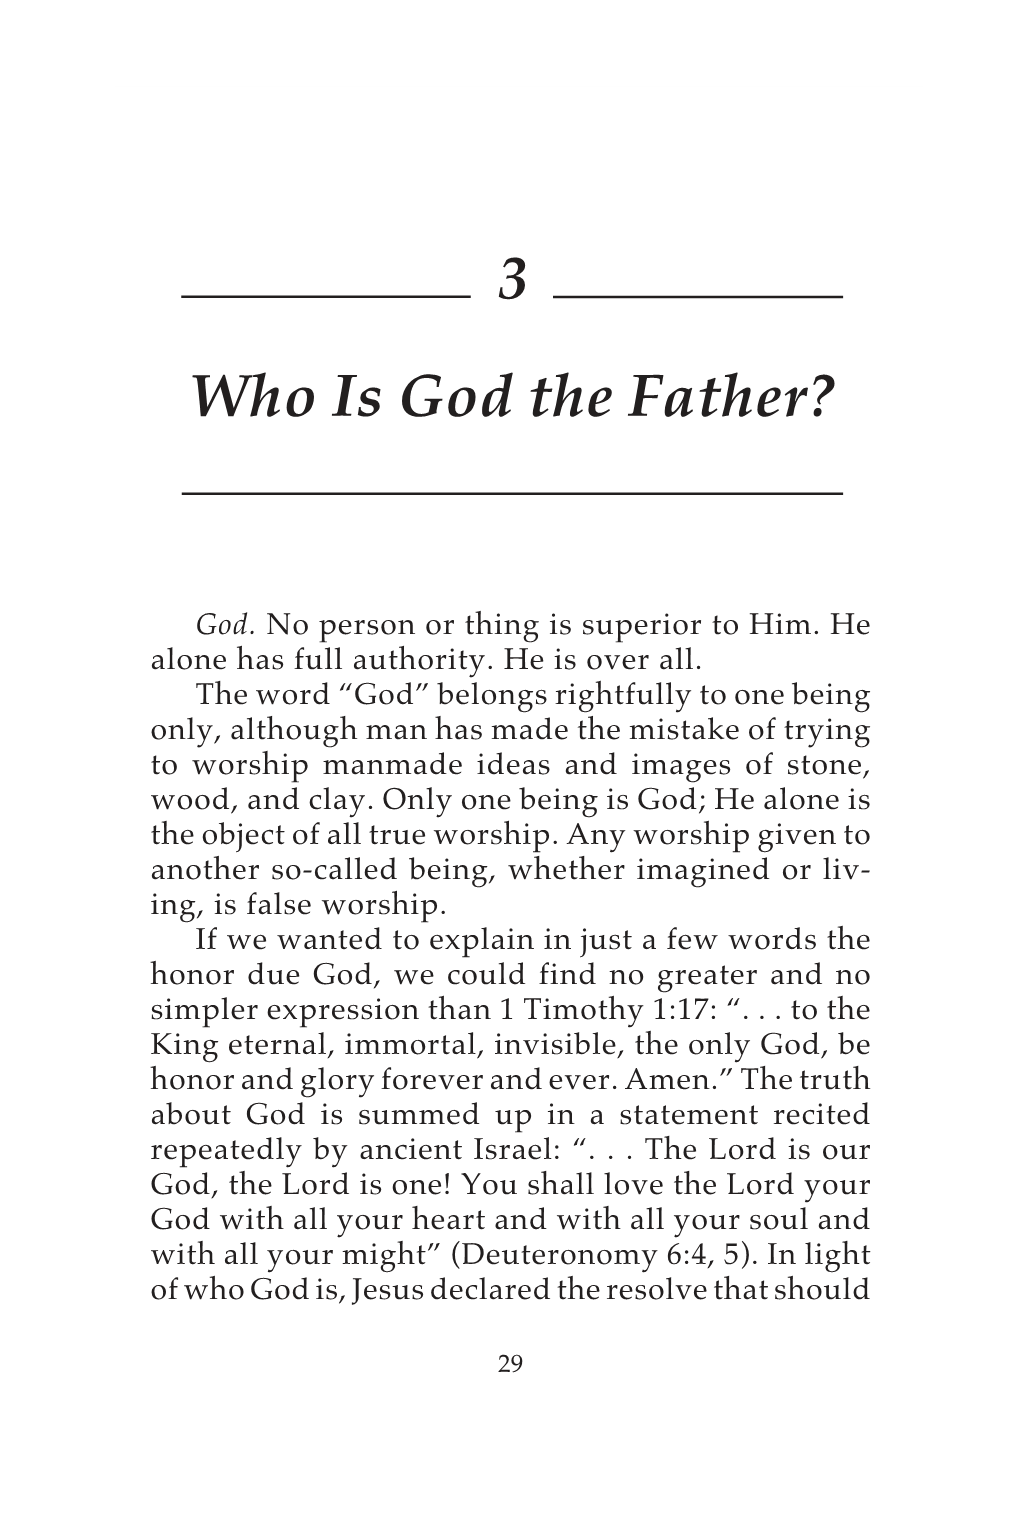 3 Who Is God the Father?